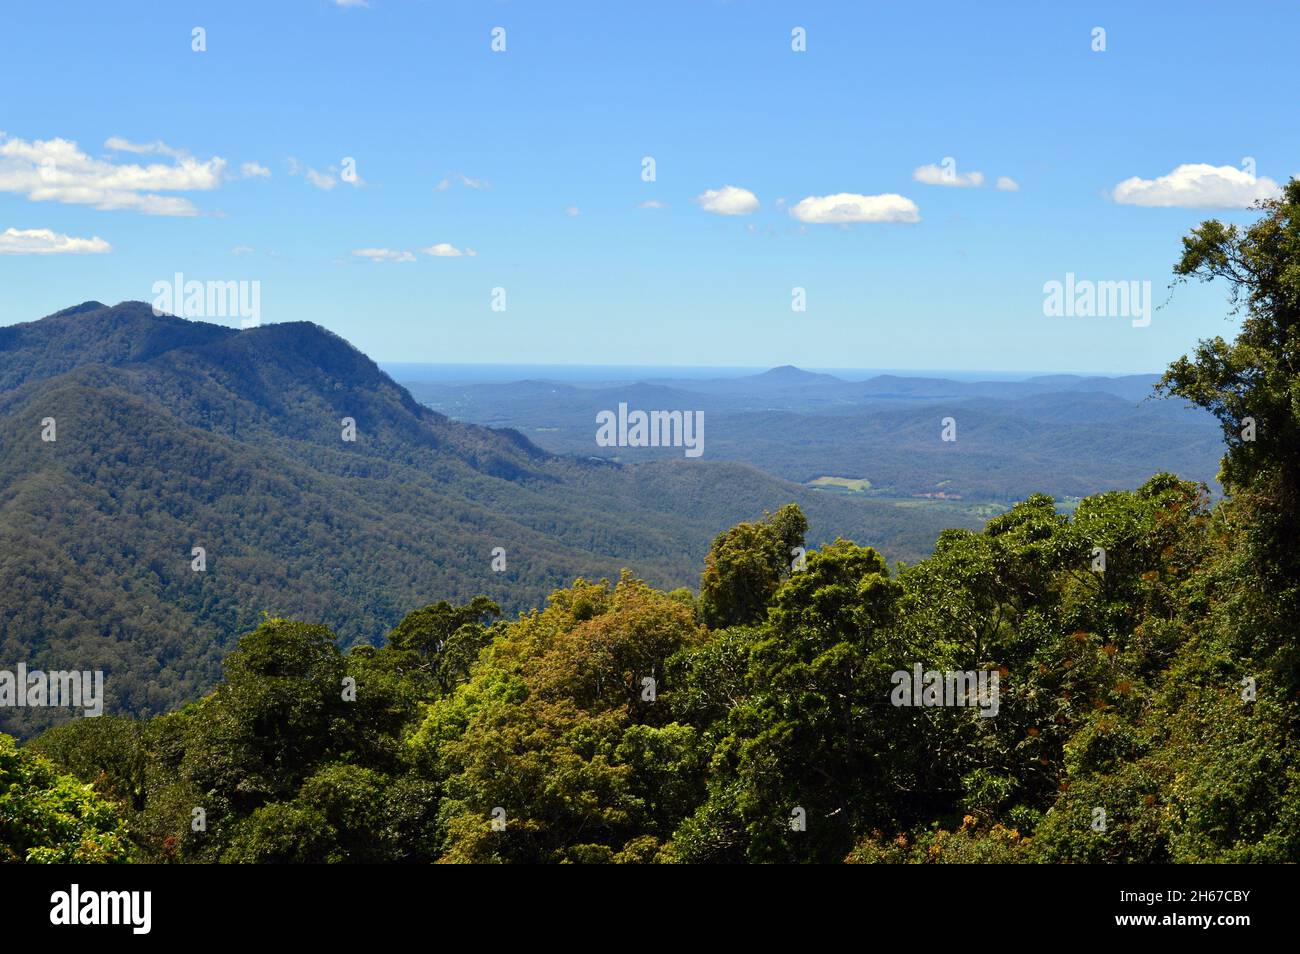 A view from the Skywalk in the Dorrigo National Park Stock Photo